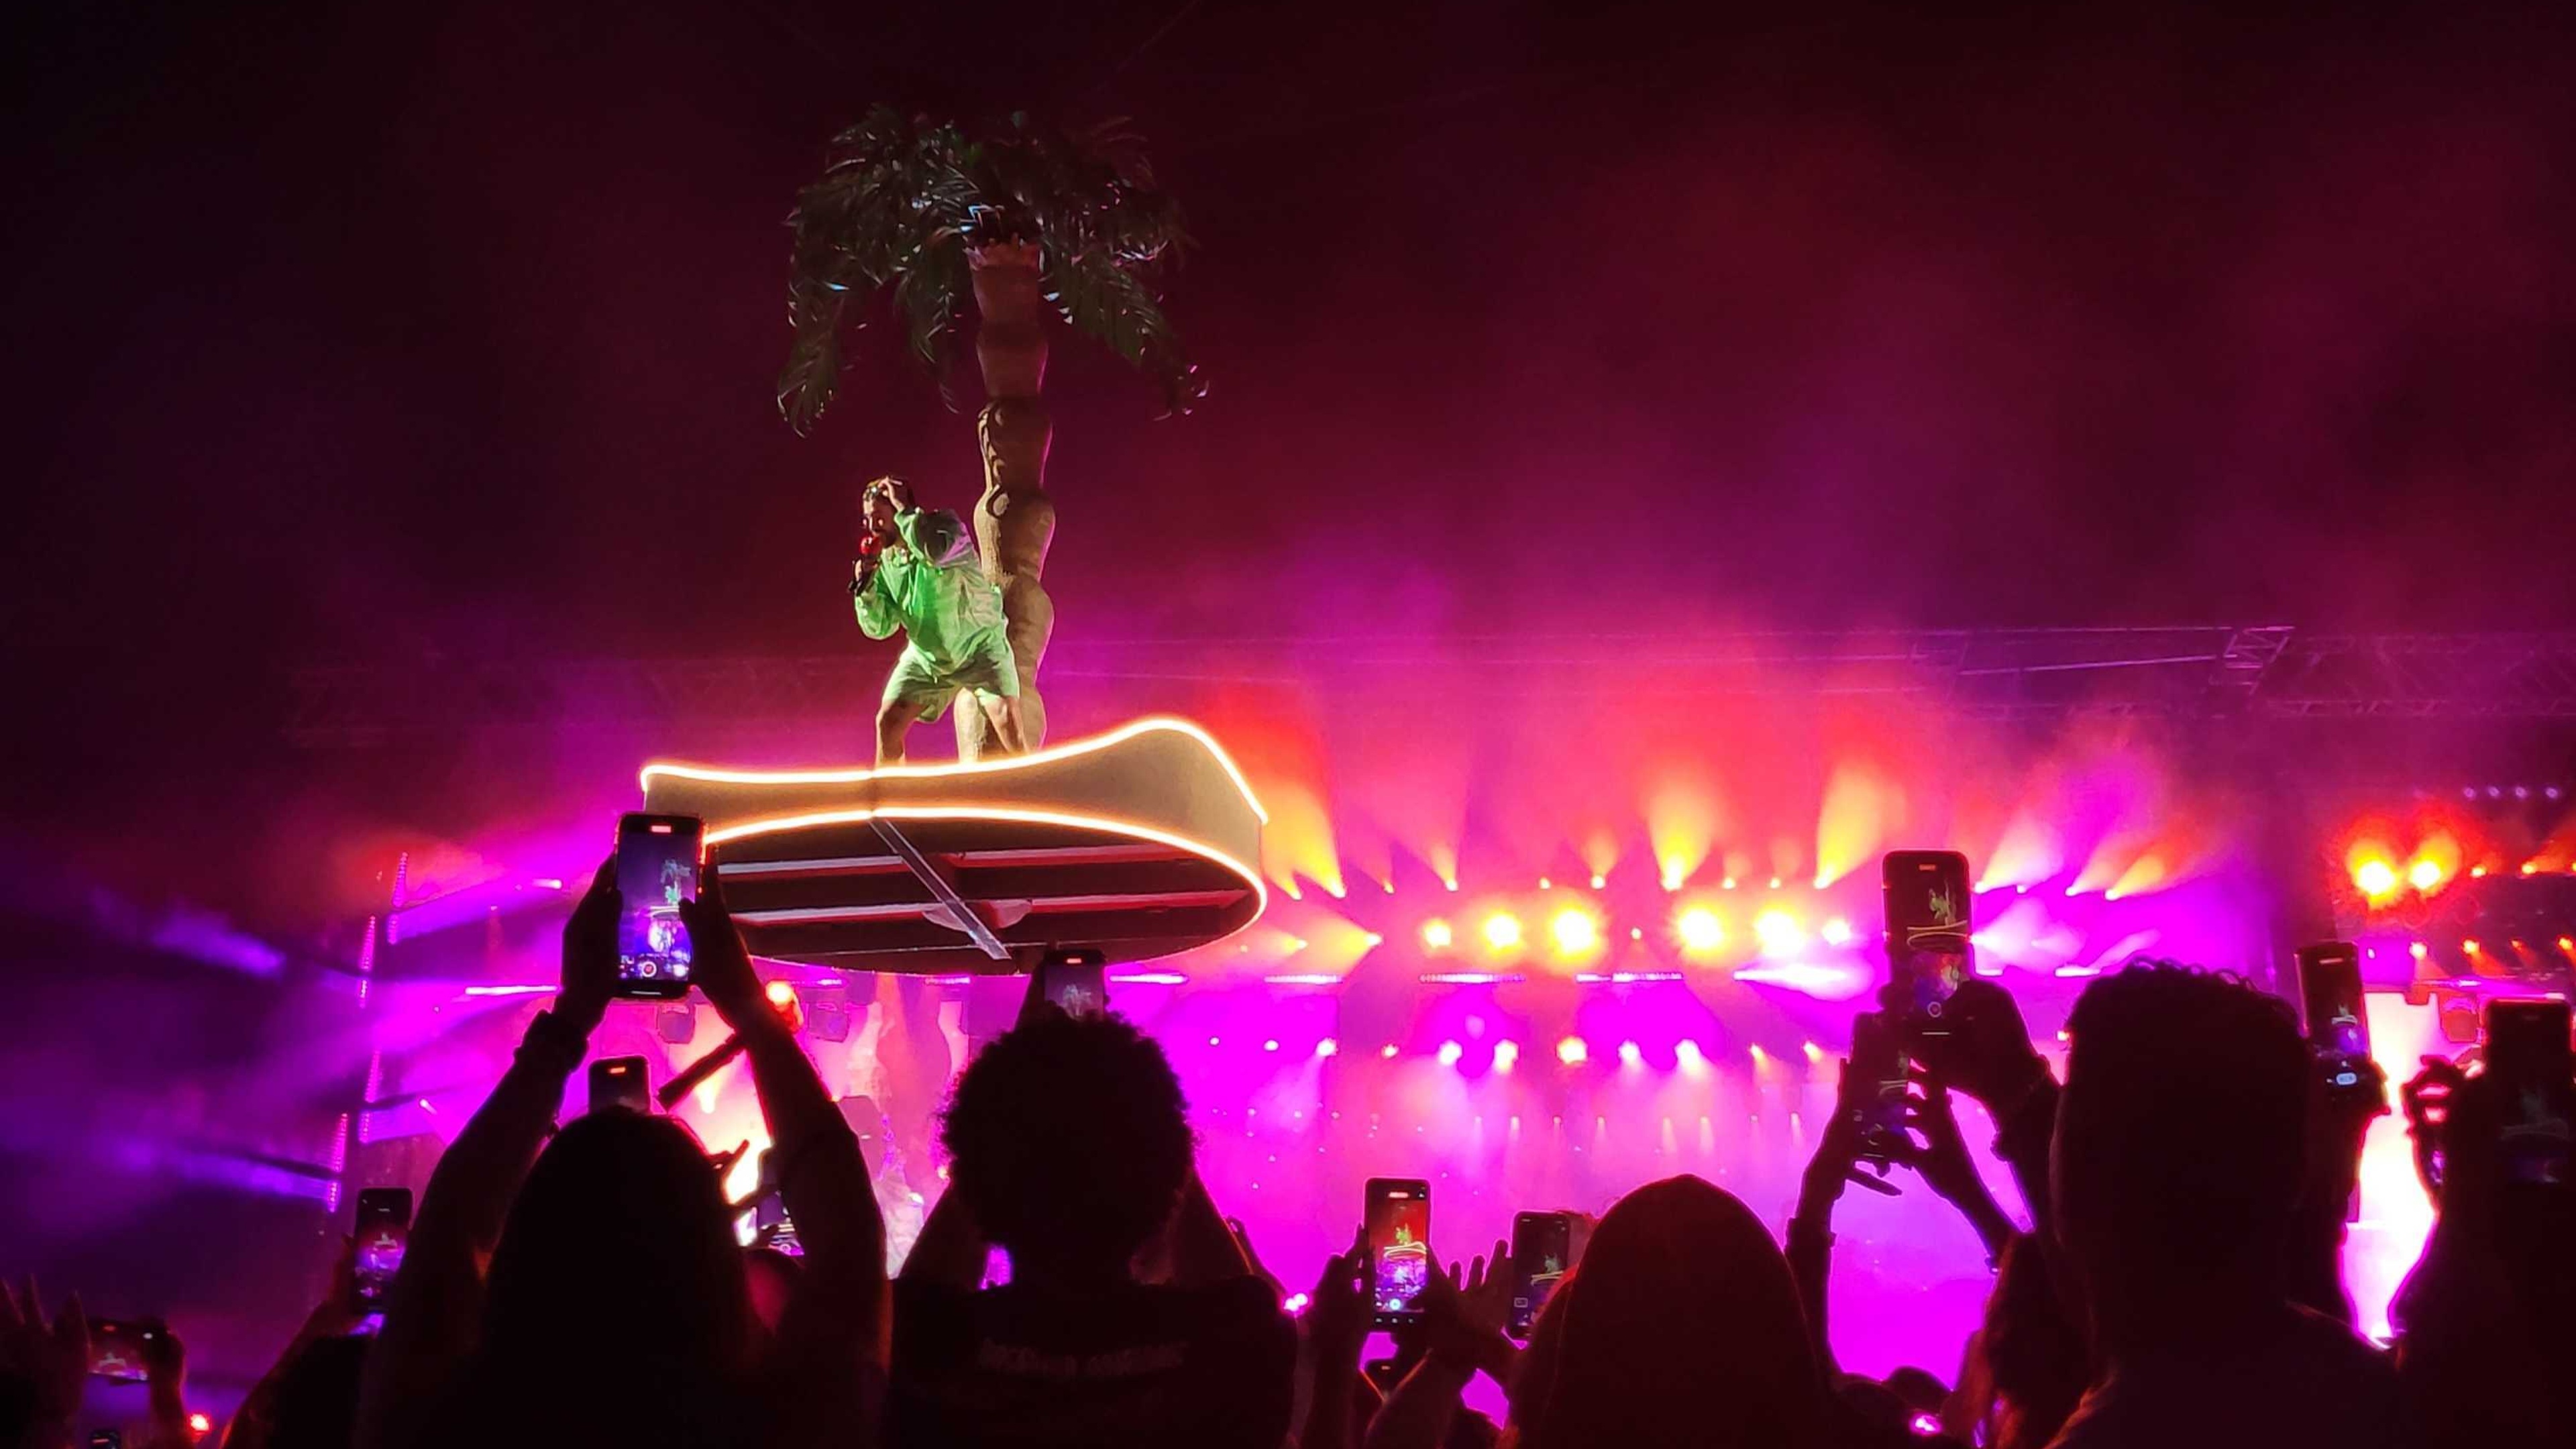 Bad Bunny flying above cheering crowd on palm tree with pink lights behind him